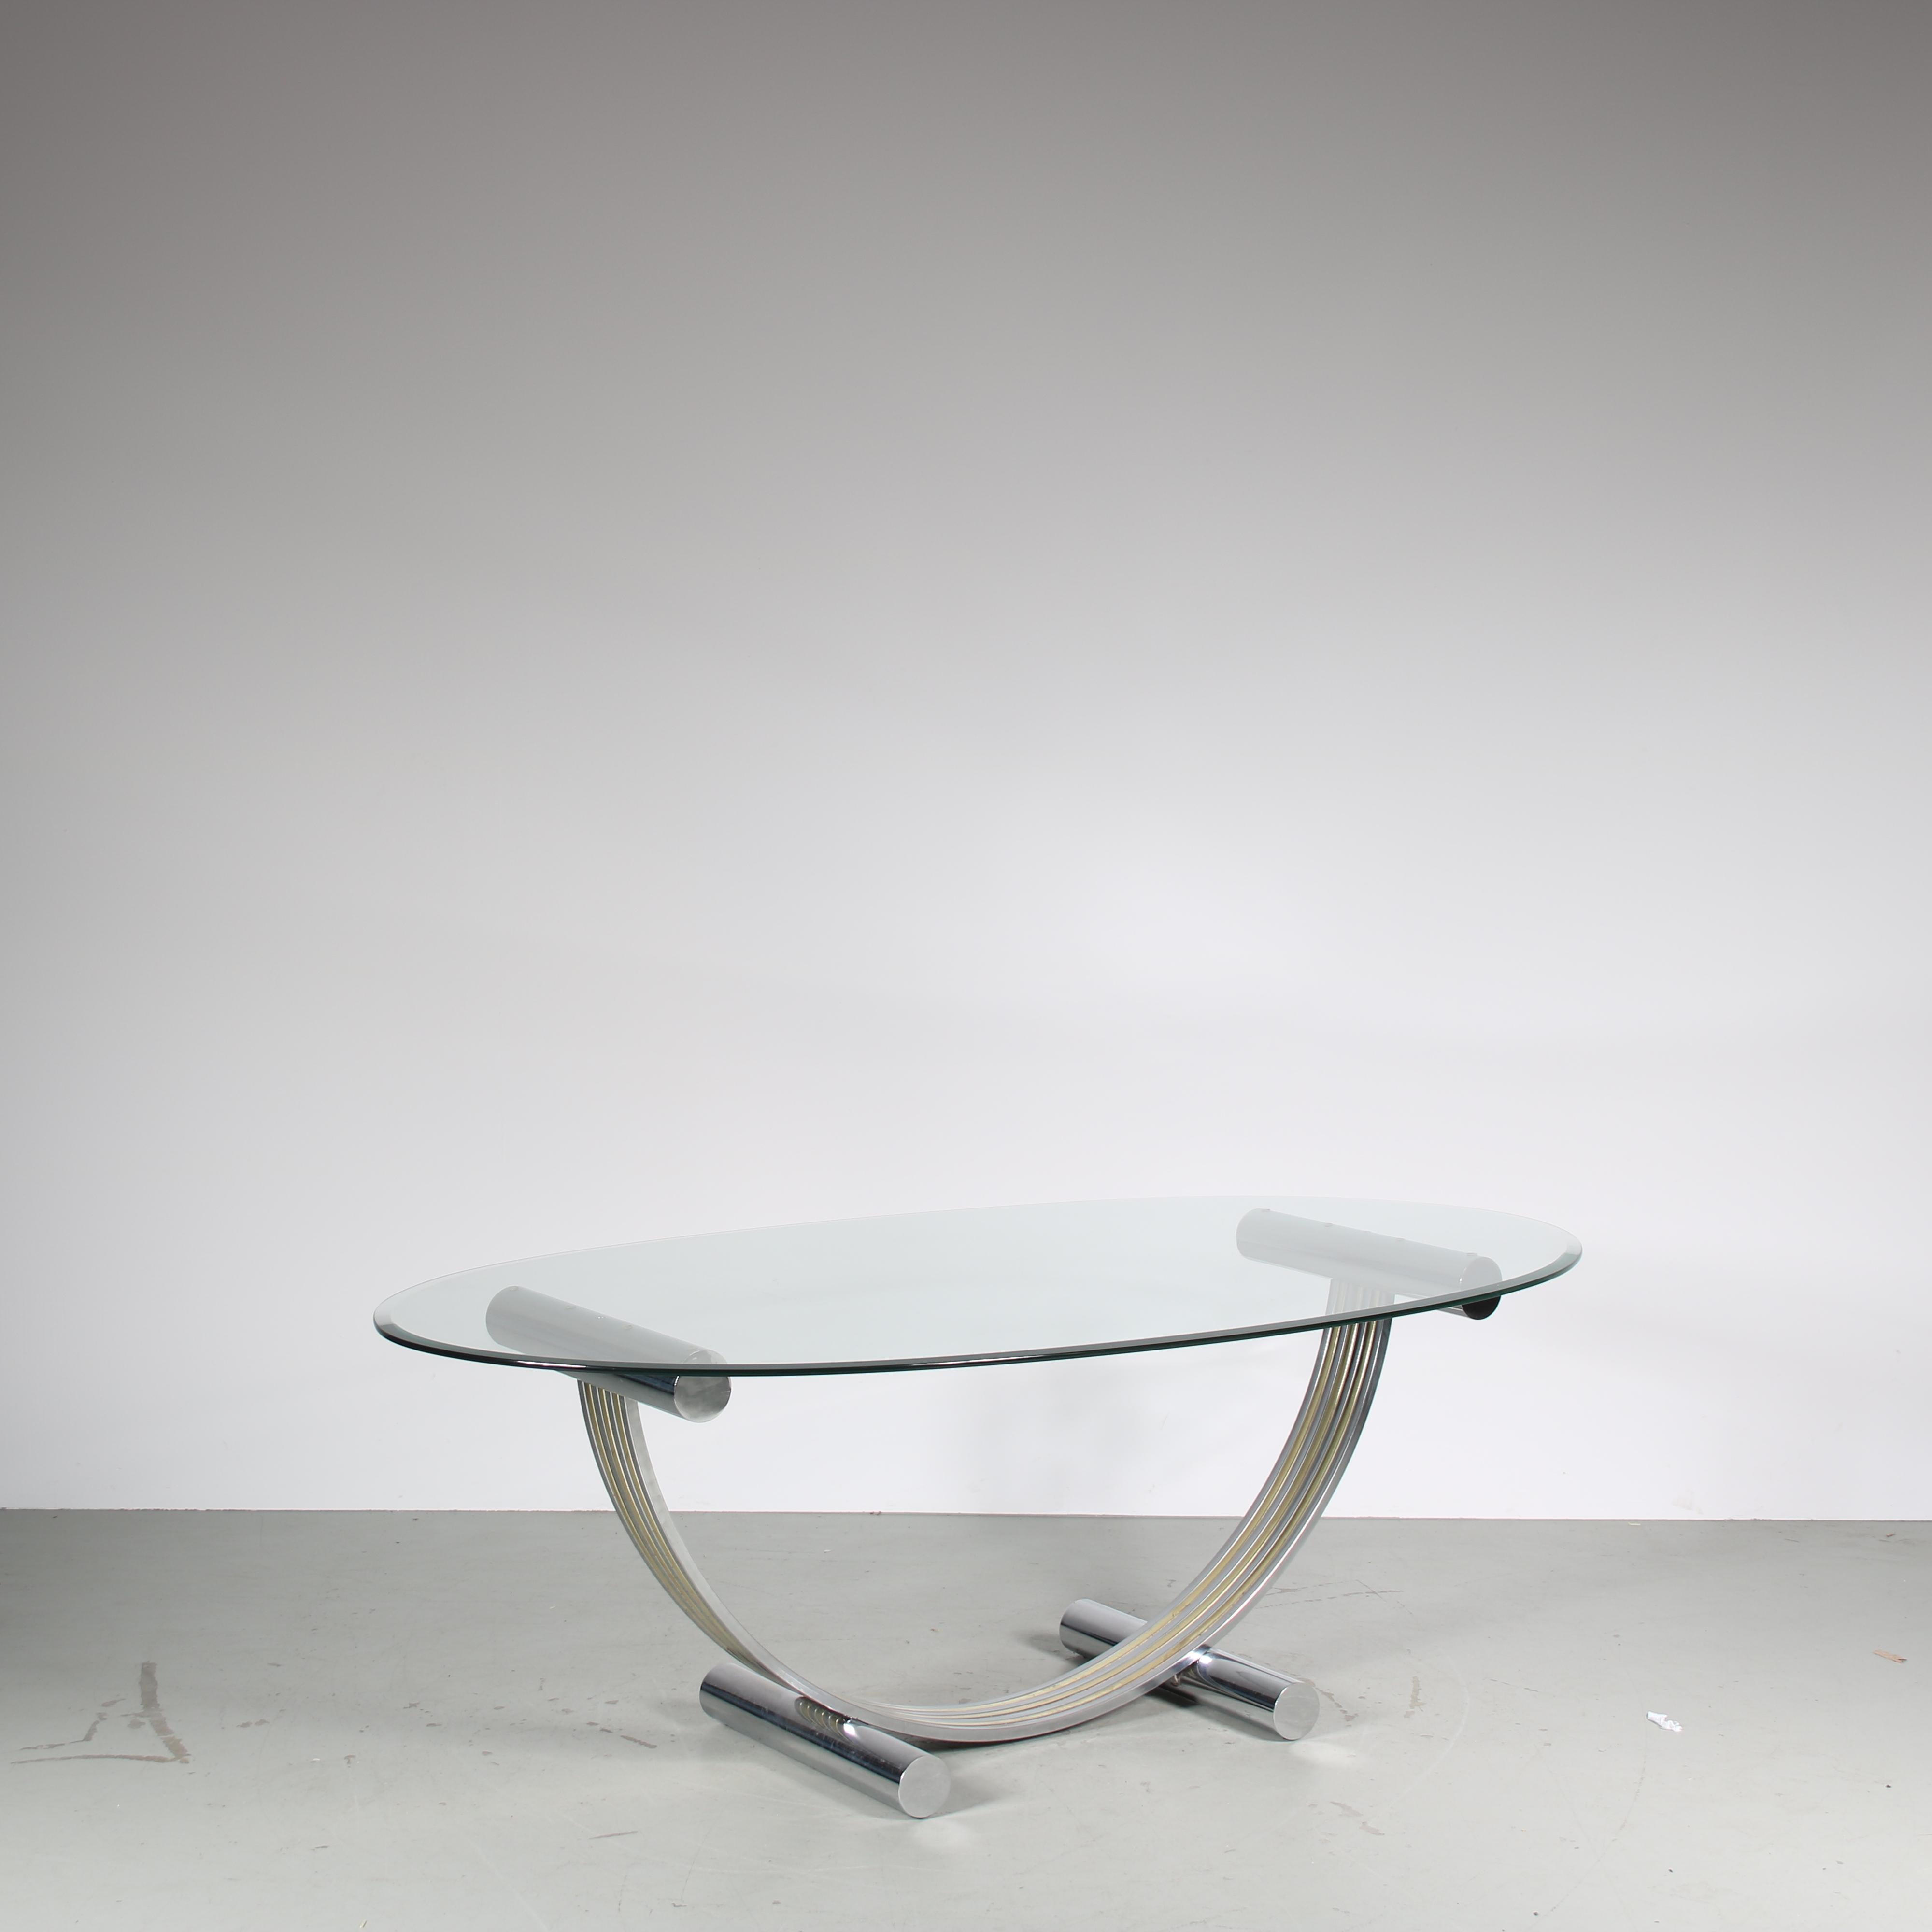 A wonderful dining table, designed by Romeo Rega and manufactured in Italy around 1970.

The unique frame of the table has chrome plated, tubular metal legs and supports connected by a large half-circle shaped frame in chrome and gold plated metal.